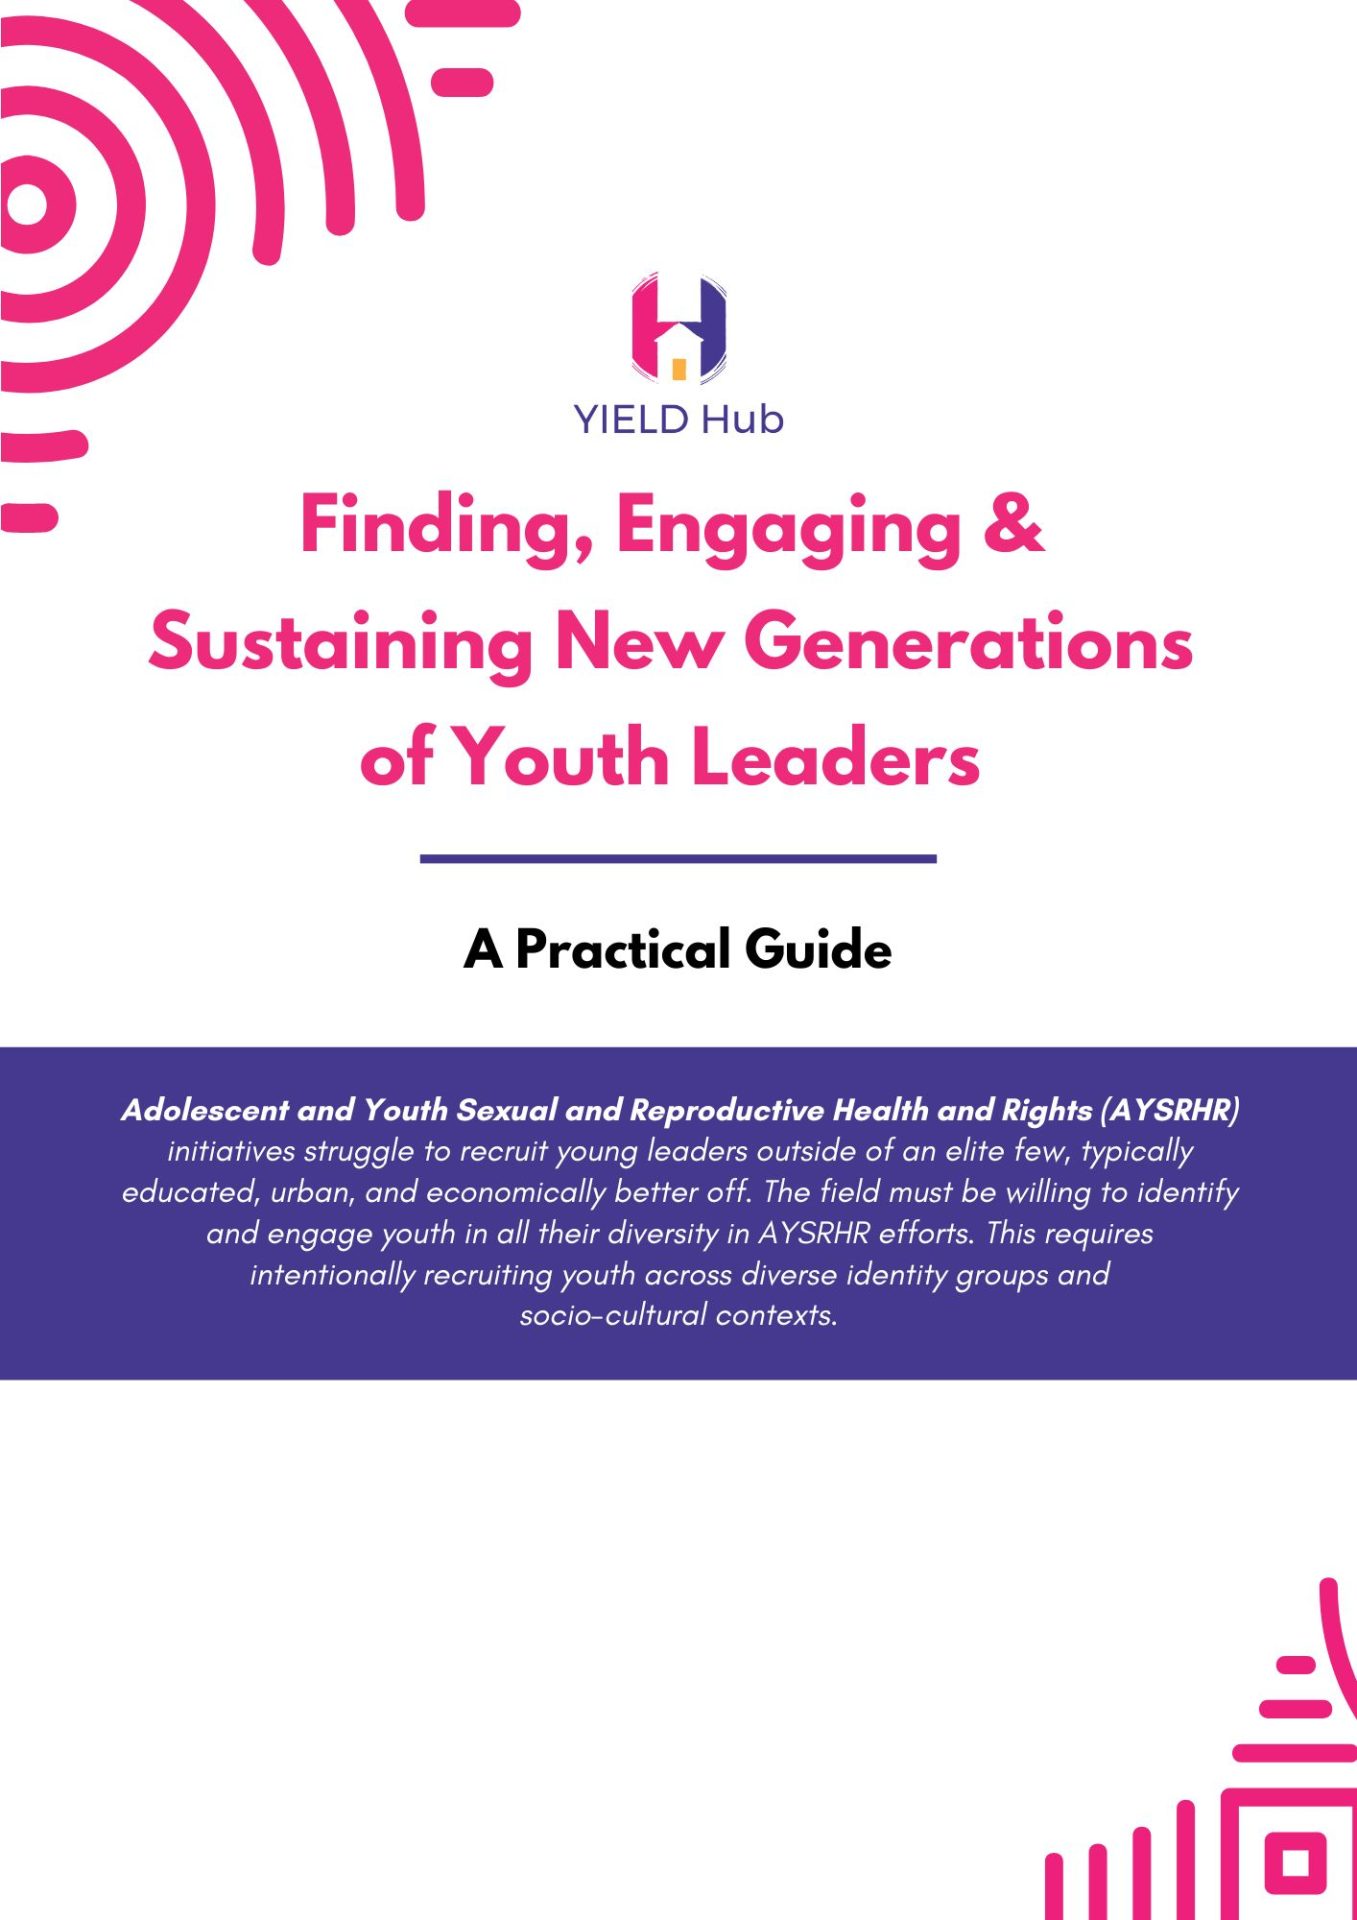 A Practical Guide on Engaging & Sustaining Youth Leaders